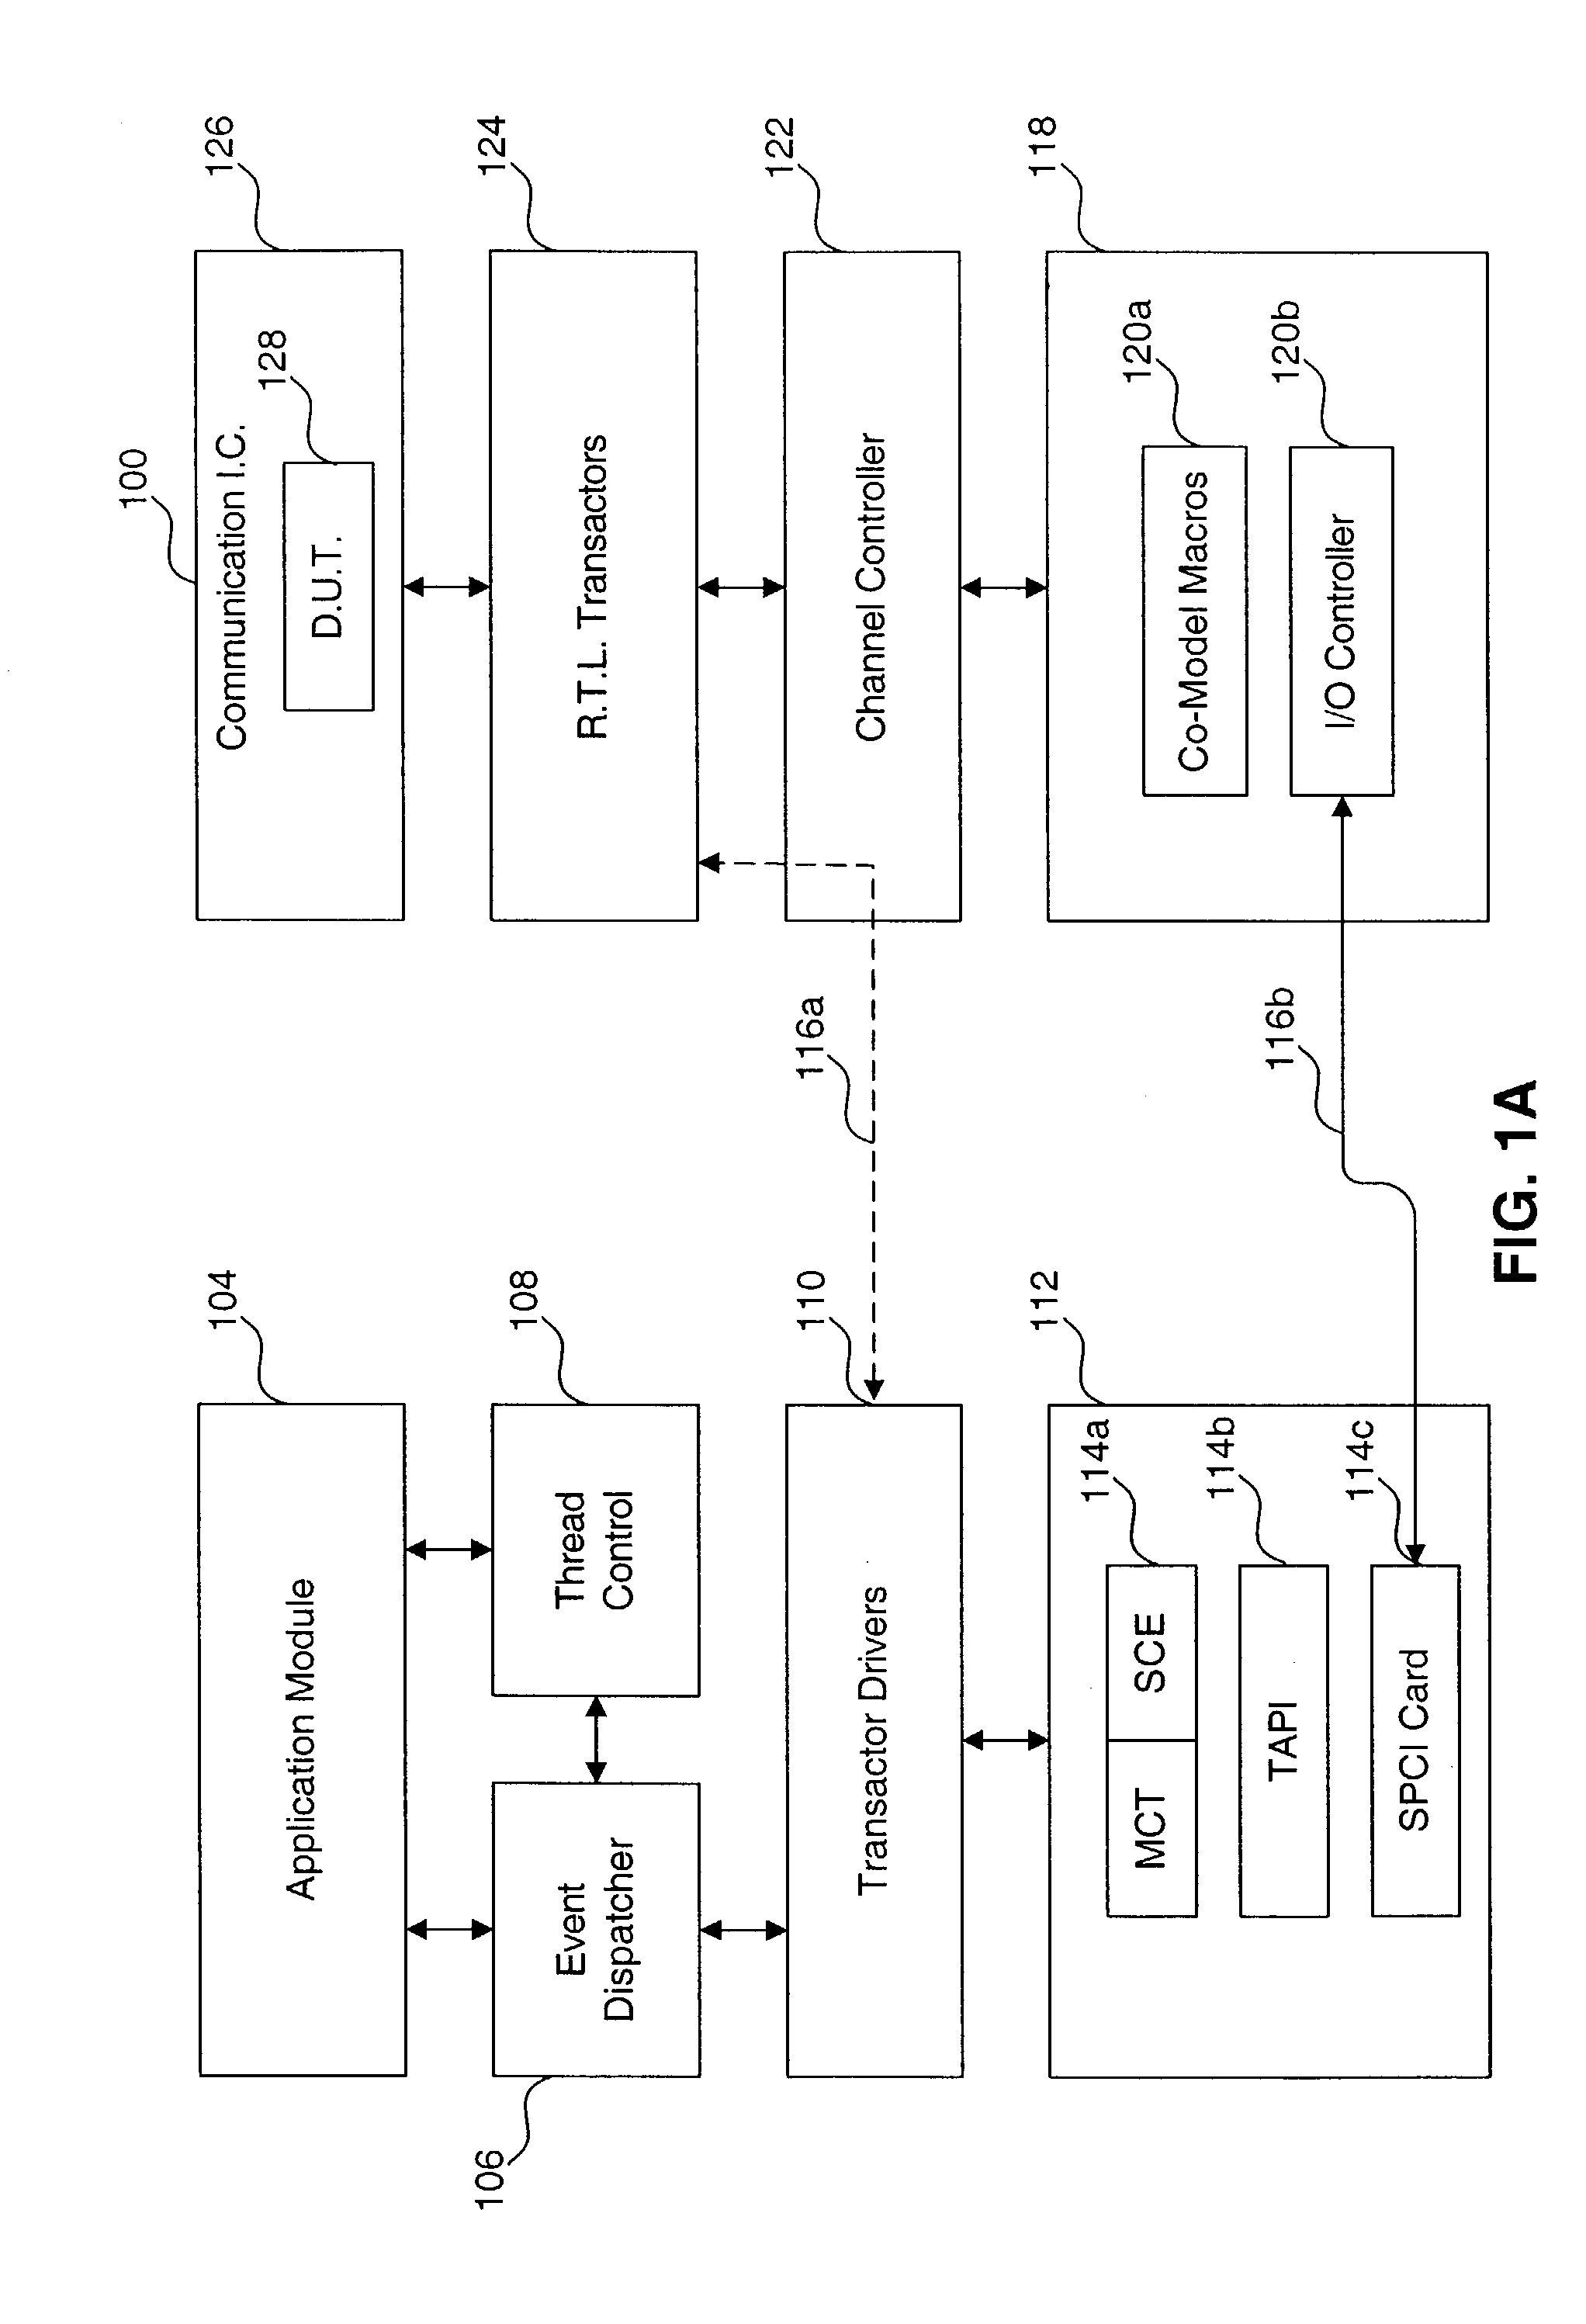 Method and system for deterministic control of an emulation